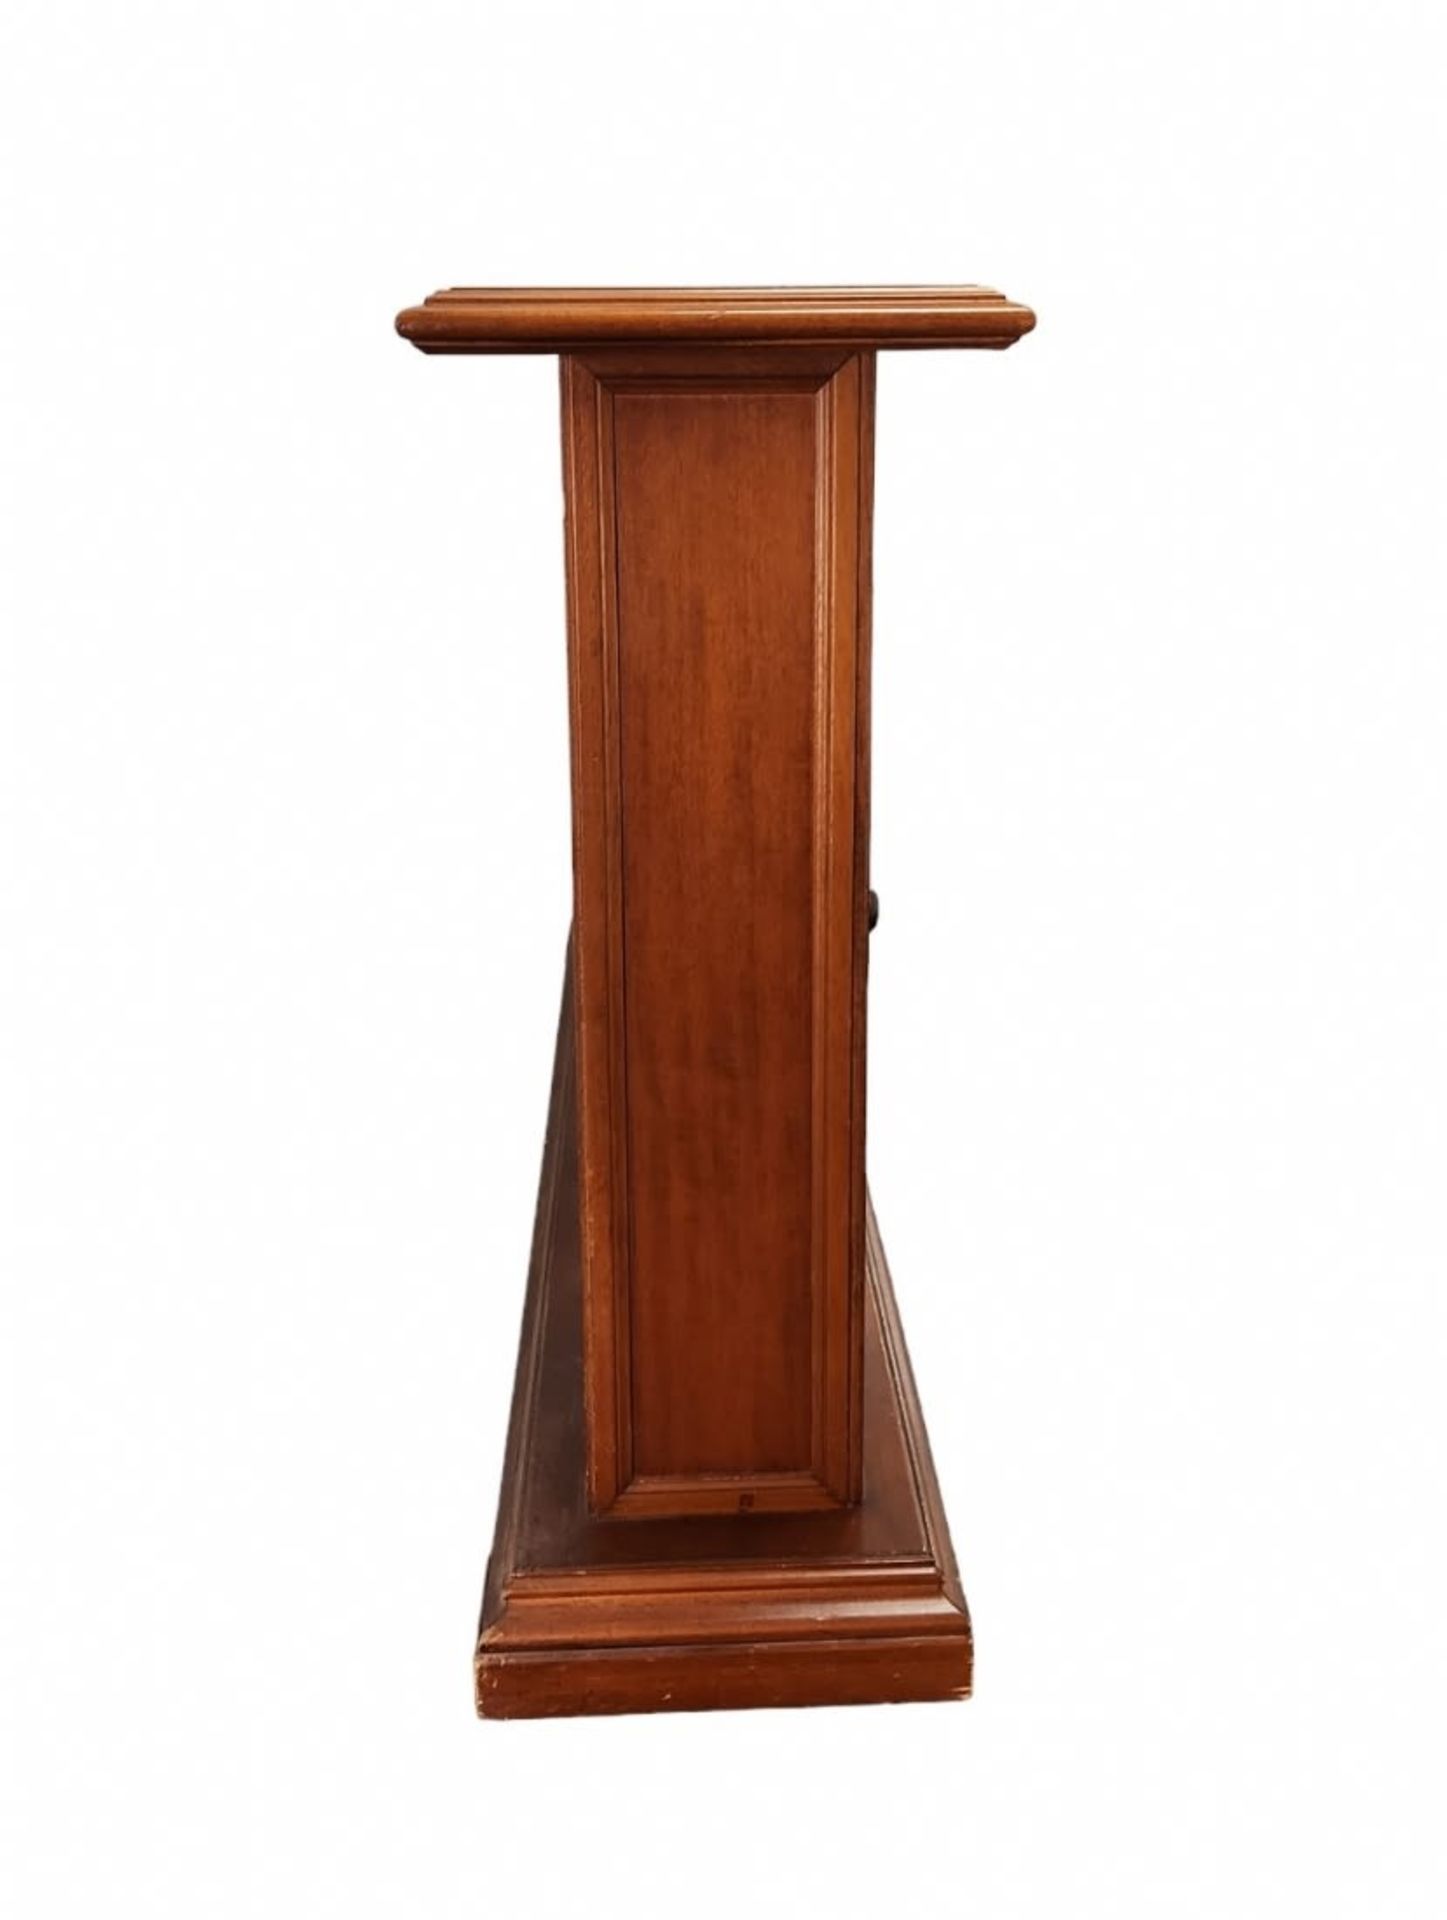 Console (furniture), antique style furniture, made of wood. Height: 81 cm. Width: 31 cm. Length: 122 - Image 2 of 4